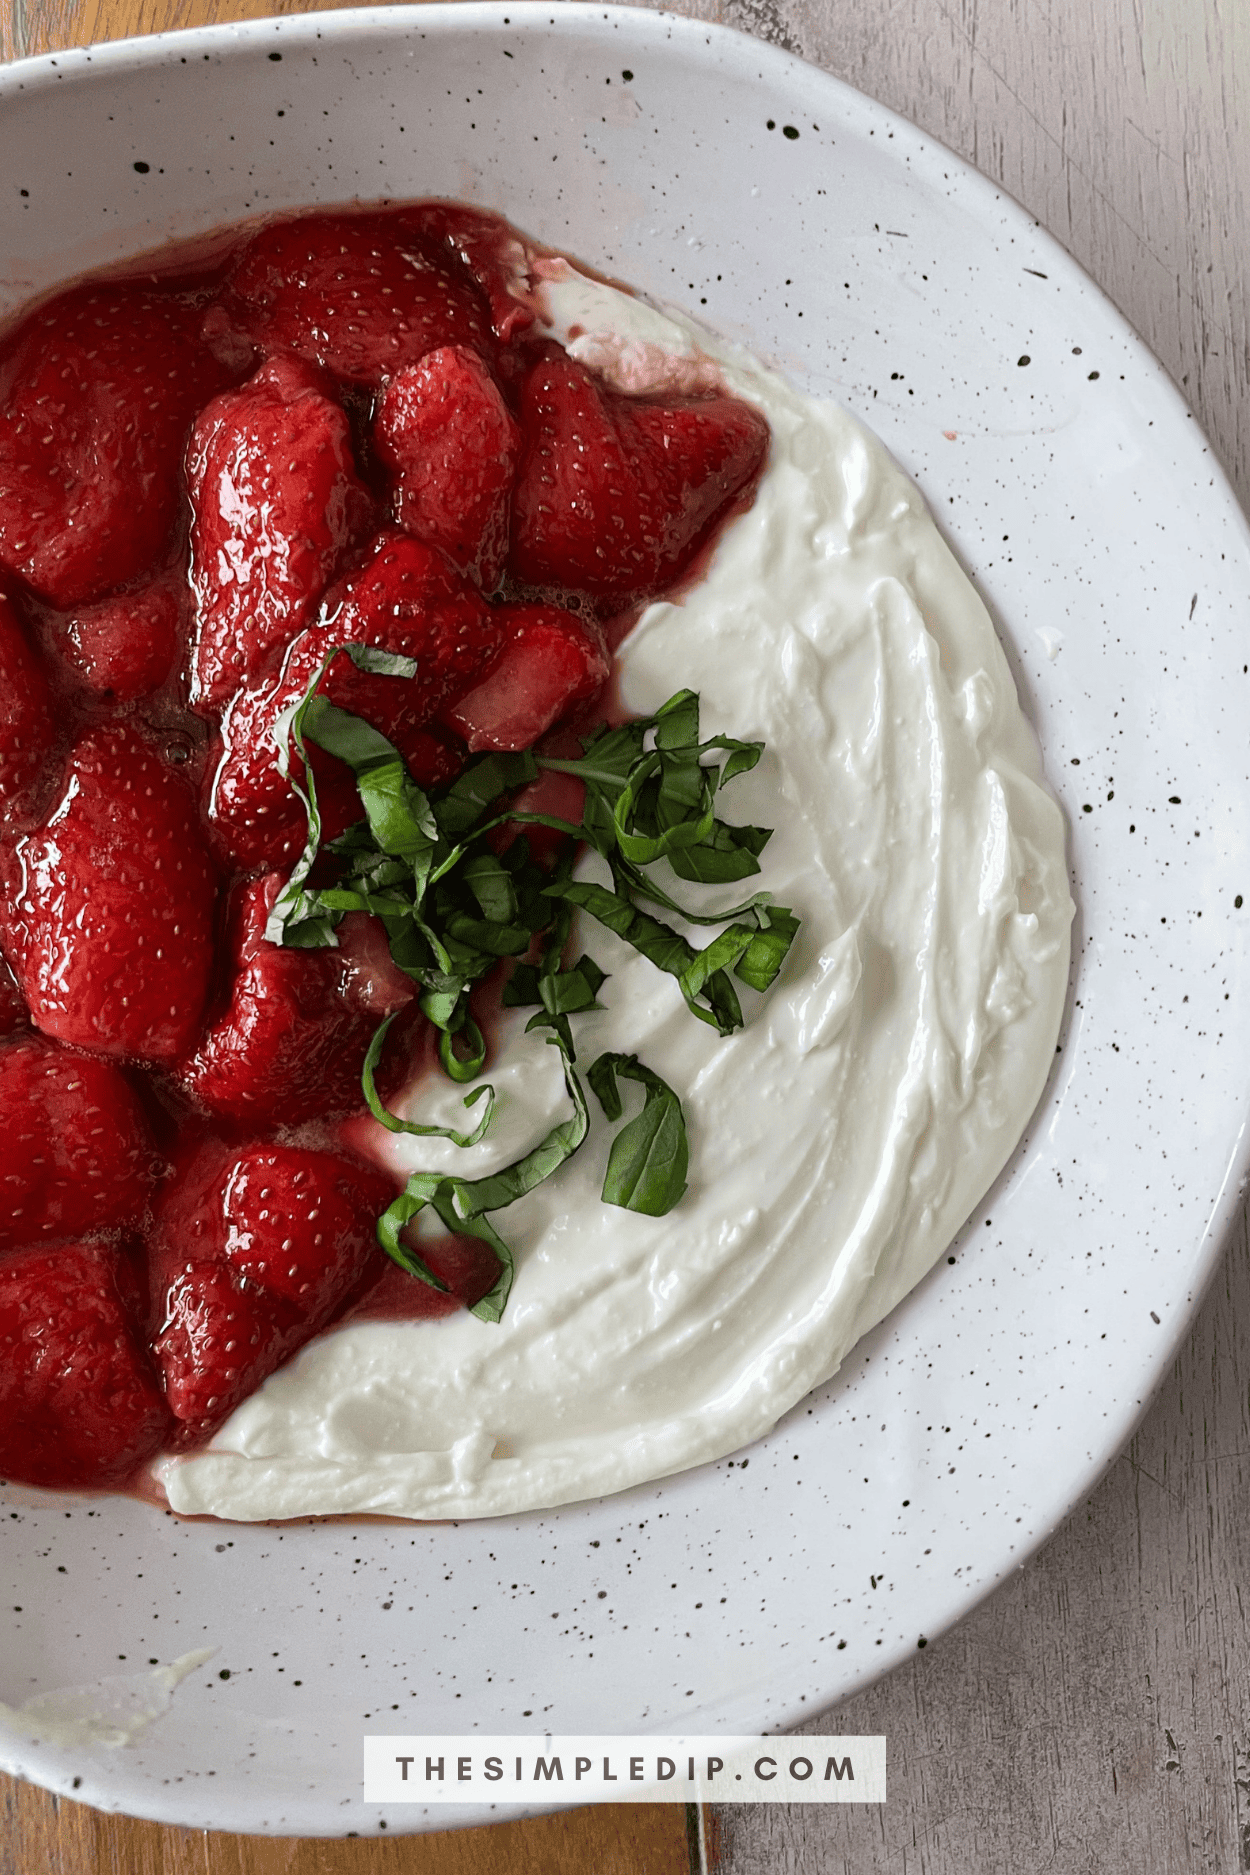 This Whipped Feta with Balsamic Roasted Strawberries features vibrant red berries, a creamy whipped feta/ricotta base, and is topped with basil ribbons. It's as bright and colorful as it is flavorful.